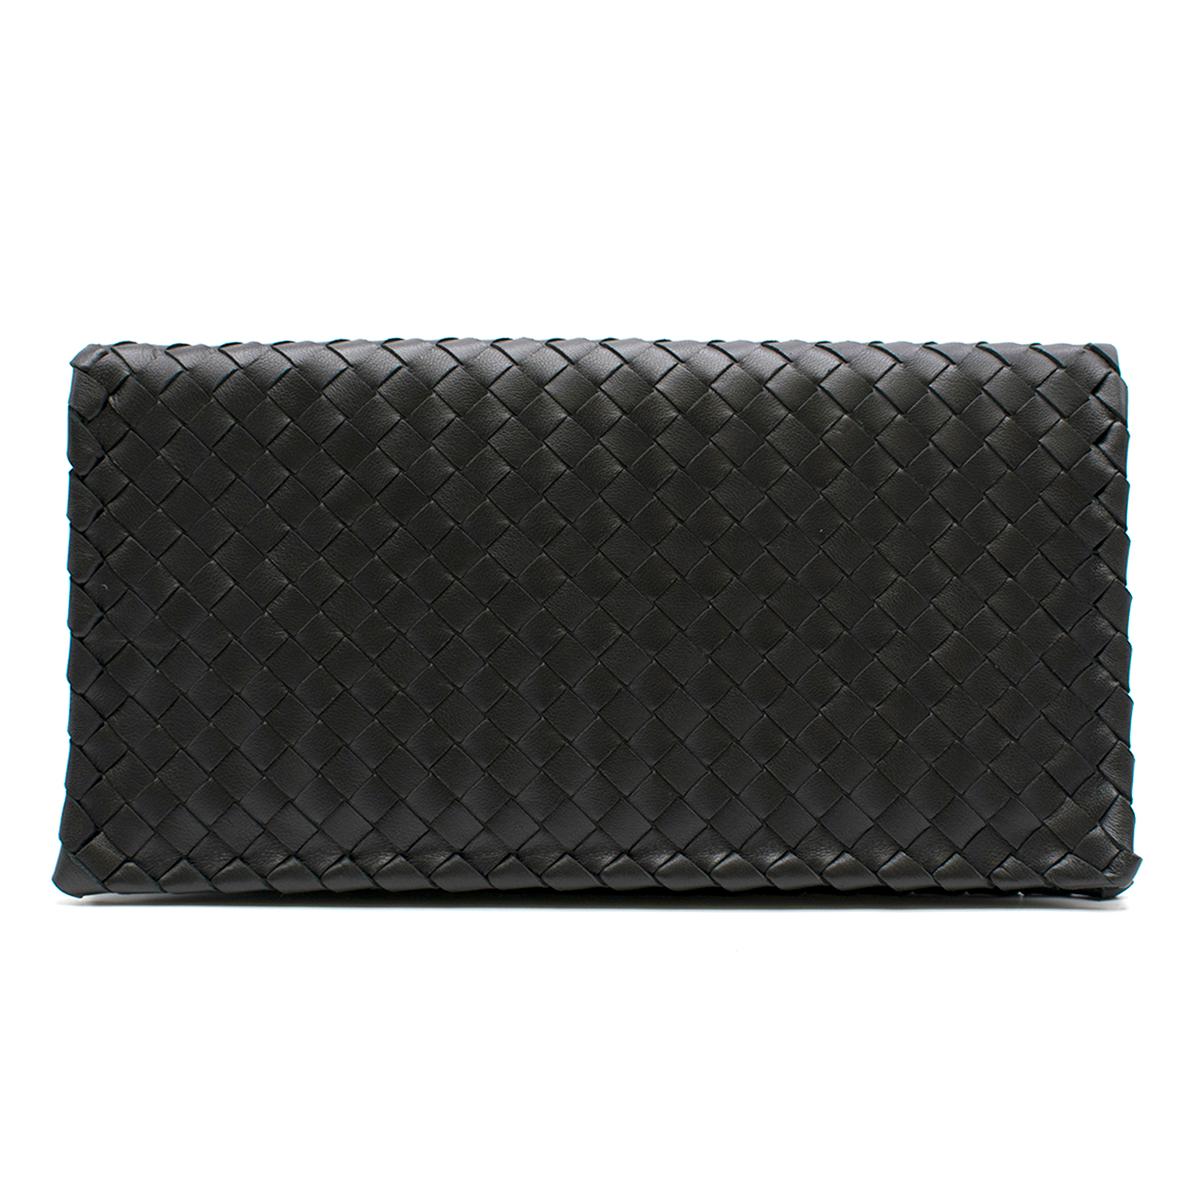 Bottega Veneta Intrecciato black leather clutch

- Black, Intrecciato woven leather 
- Intrecciato twist-lock fastening front flap
- Internal open compartment, one zip-fastening compartment
- Taupe-brown micro-fibre lining 

Please note, these items